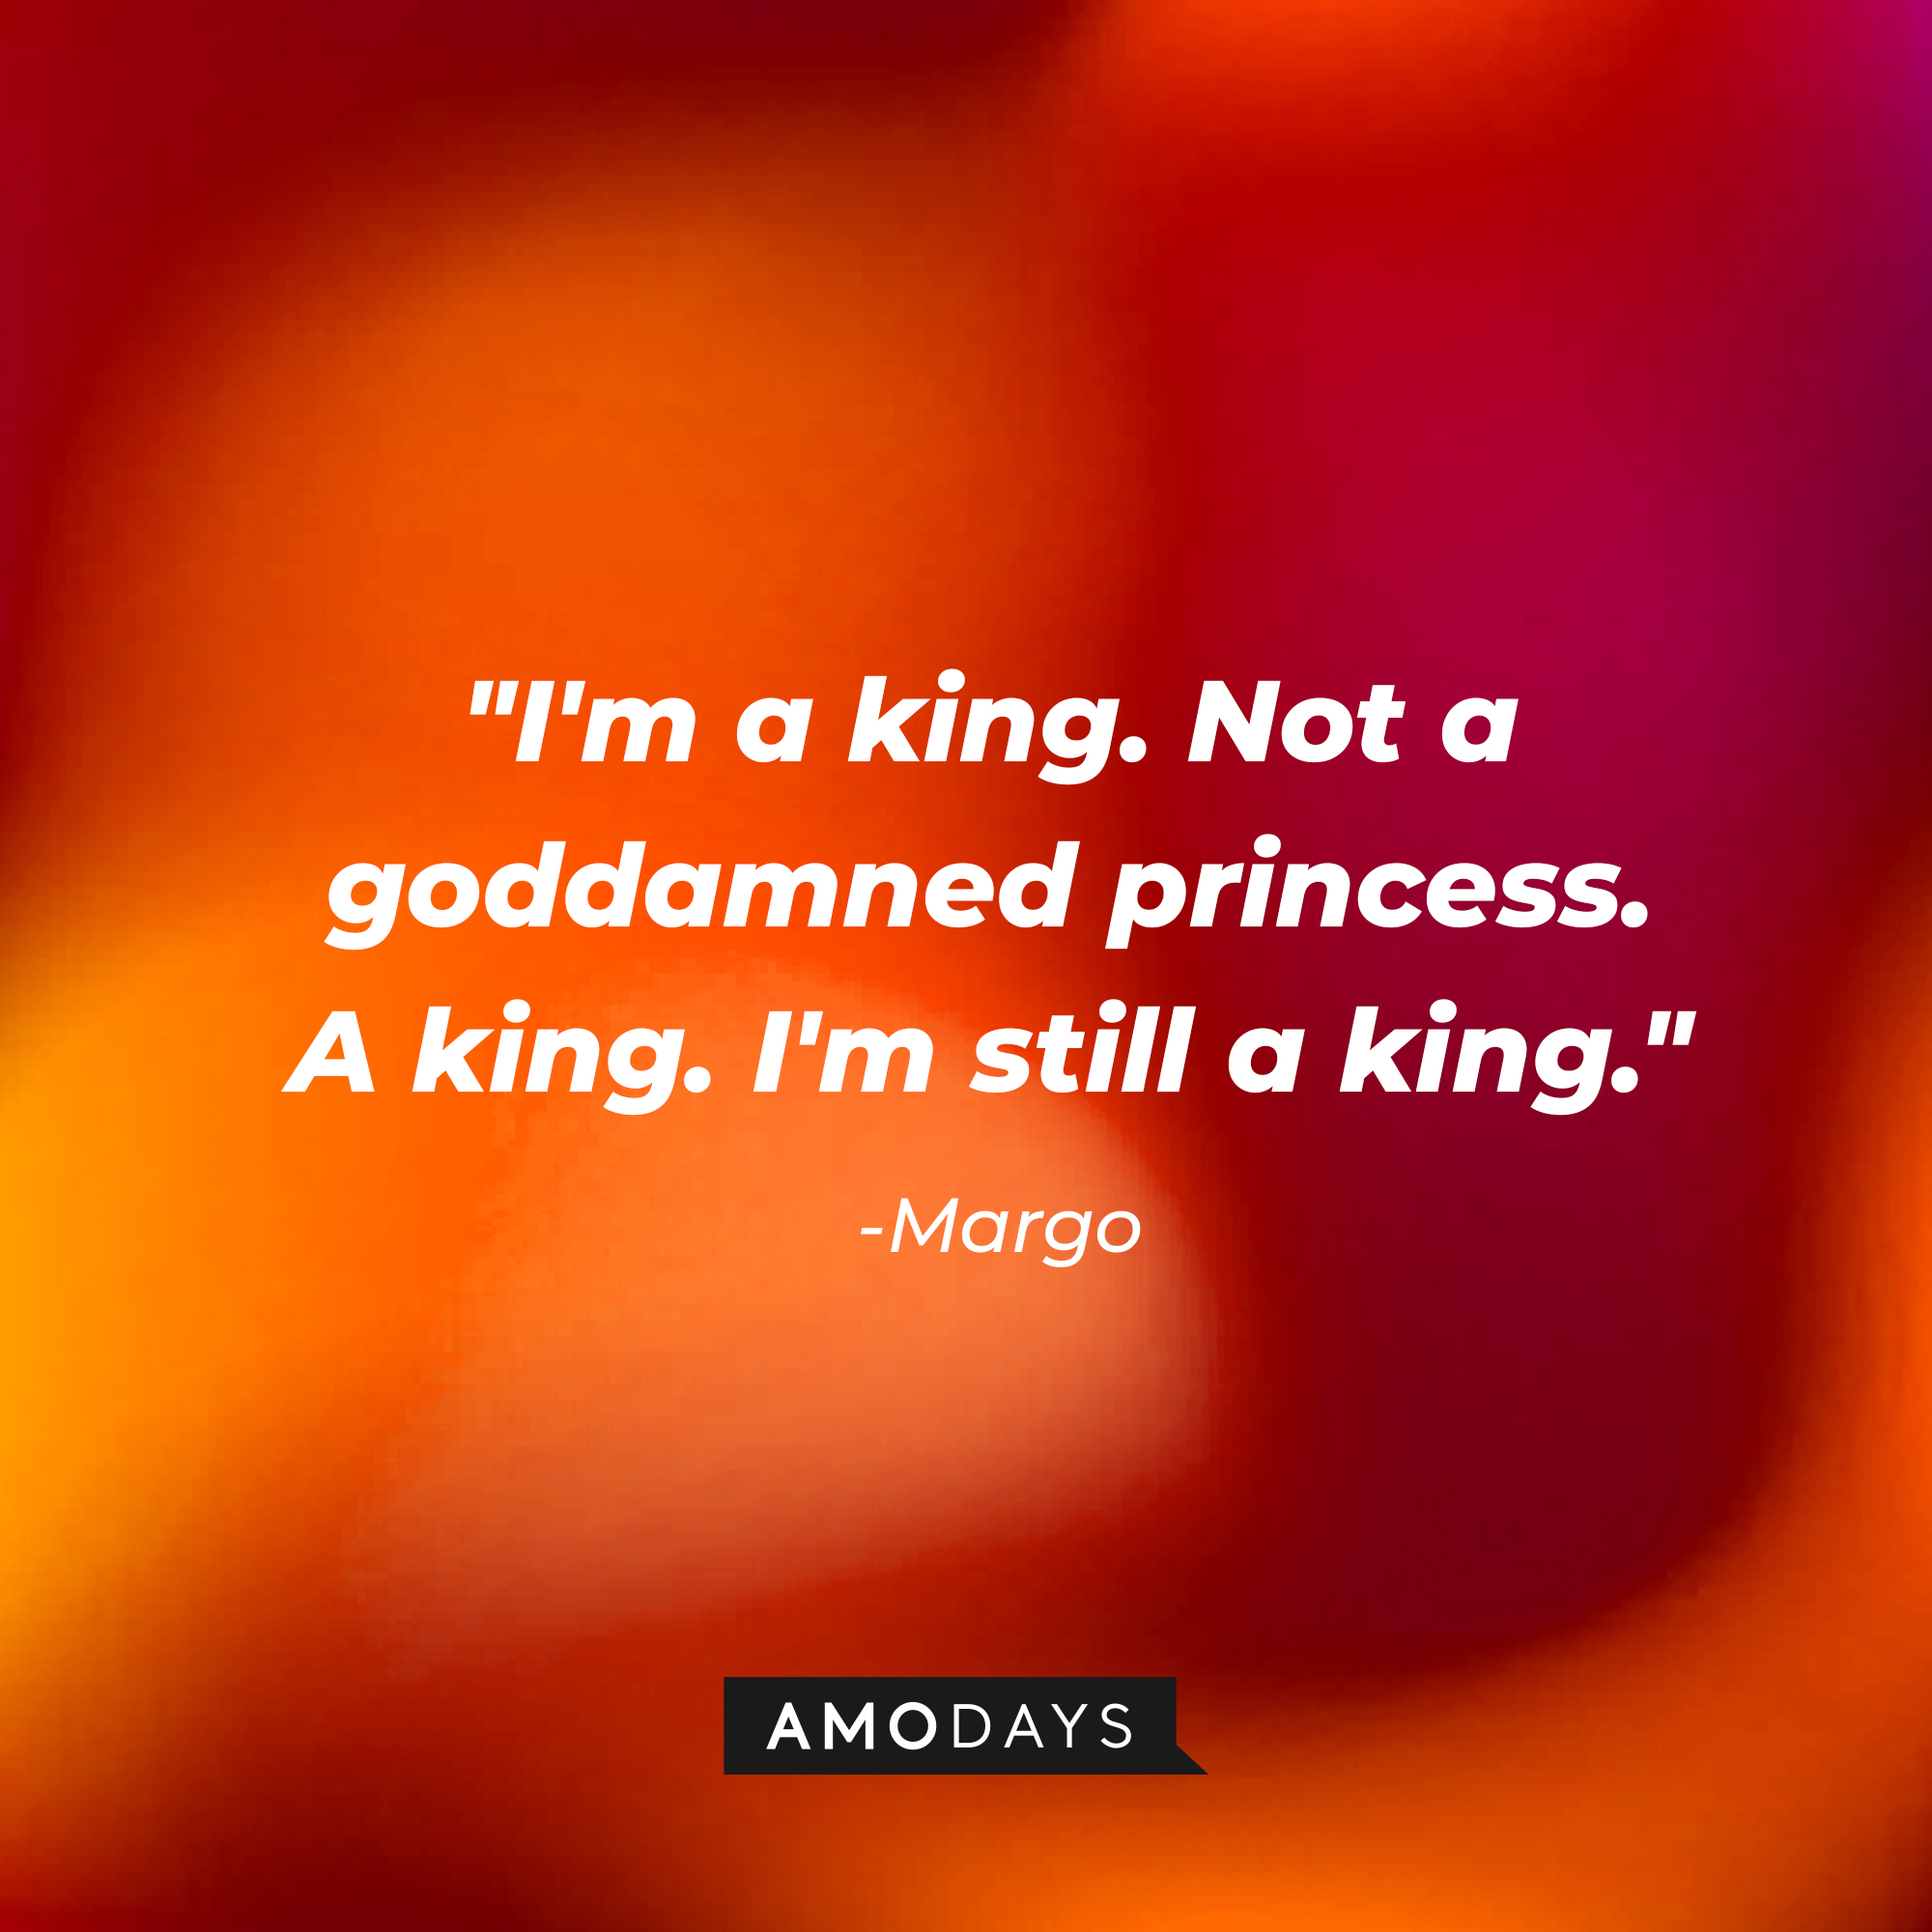 Margo’s quotes: "I'm a king. Not a goddamned princess. A king. I'm still a king." | Source: AmoDays